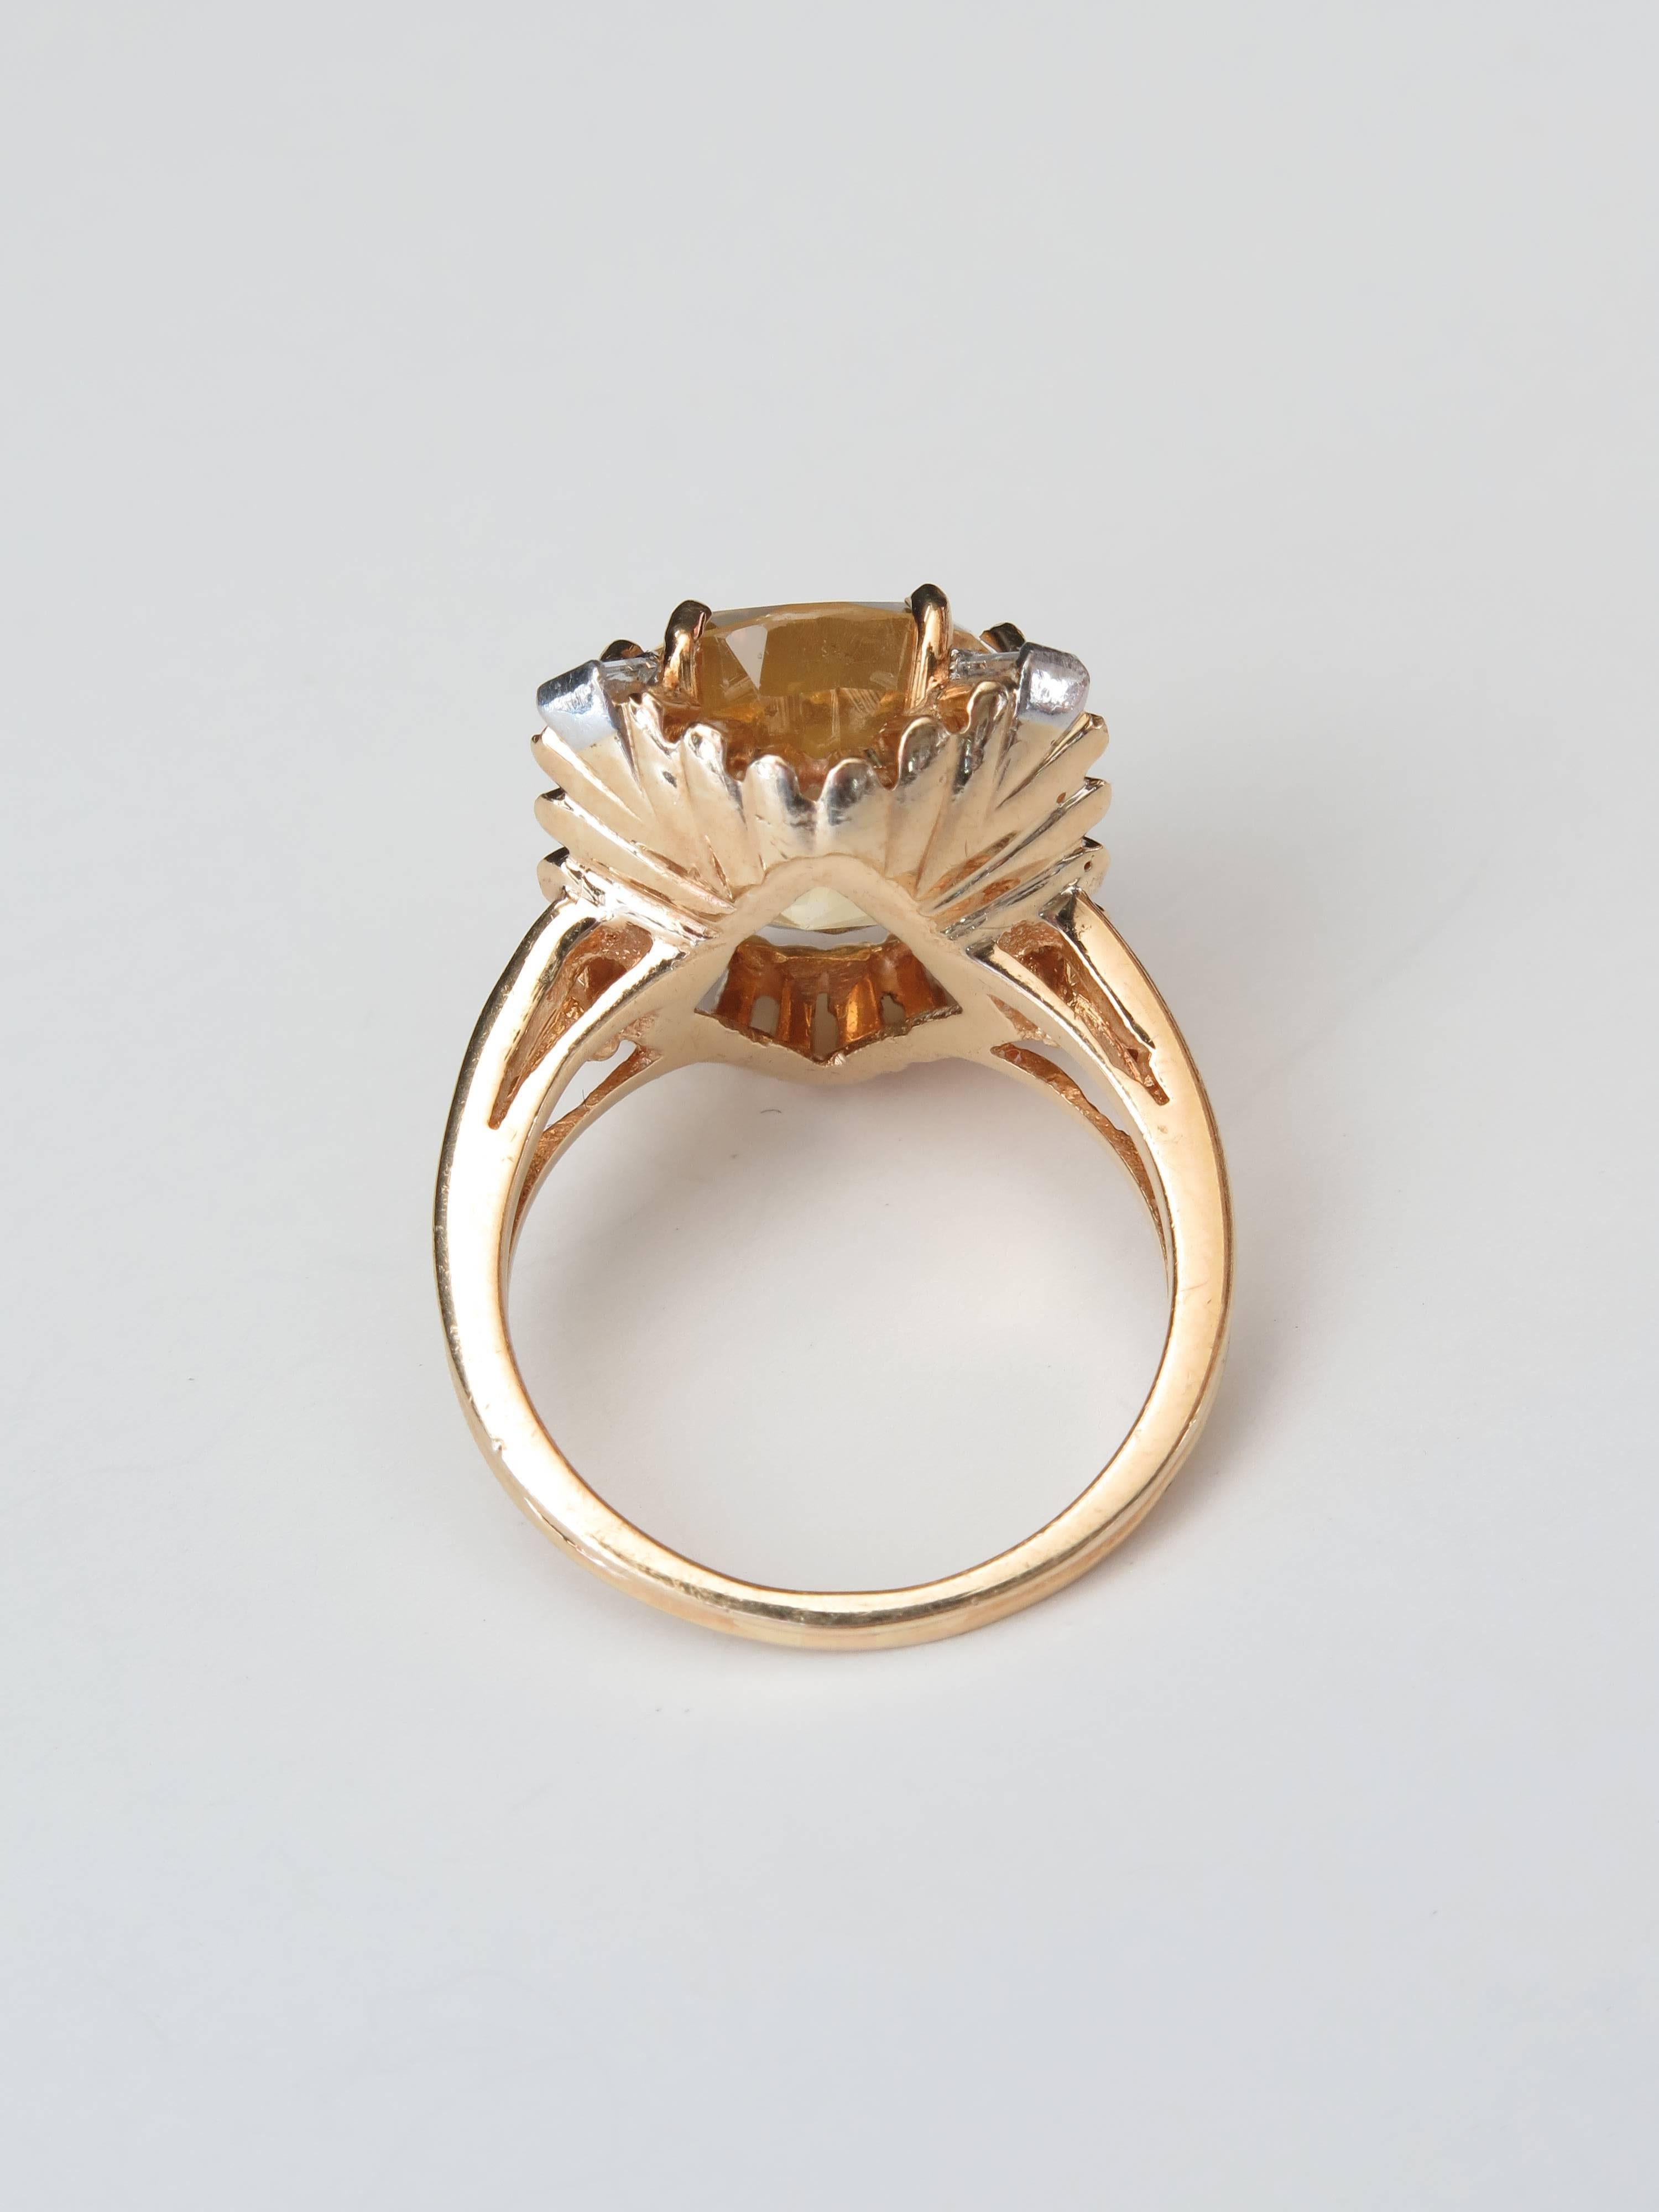 
10.05 carats natural non heat ceylon (Sri lanka) yellow sapphire mounted in
18K yellow gold with 4 baguette cut diamonds on each Conner.
come with AGL certificate.
Ring size 6. Can be re-sized.